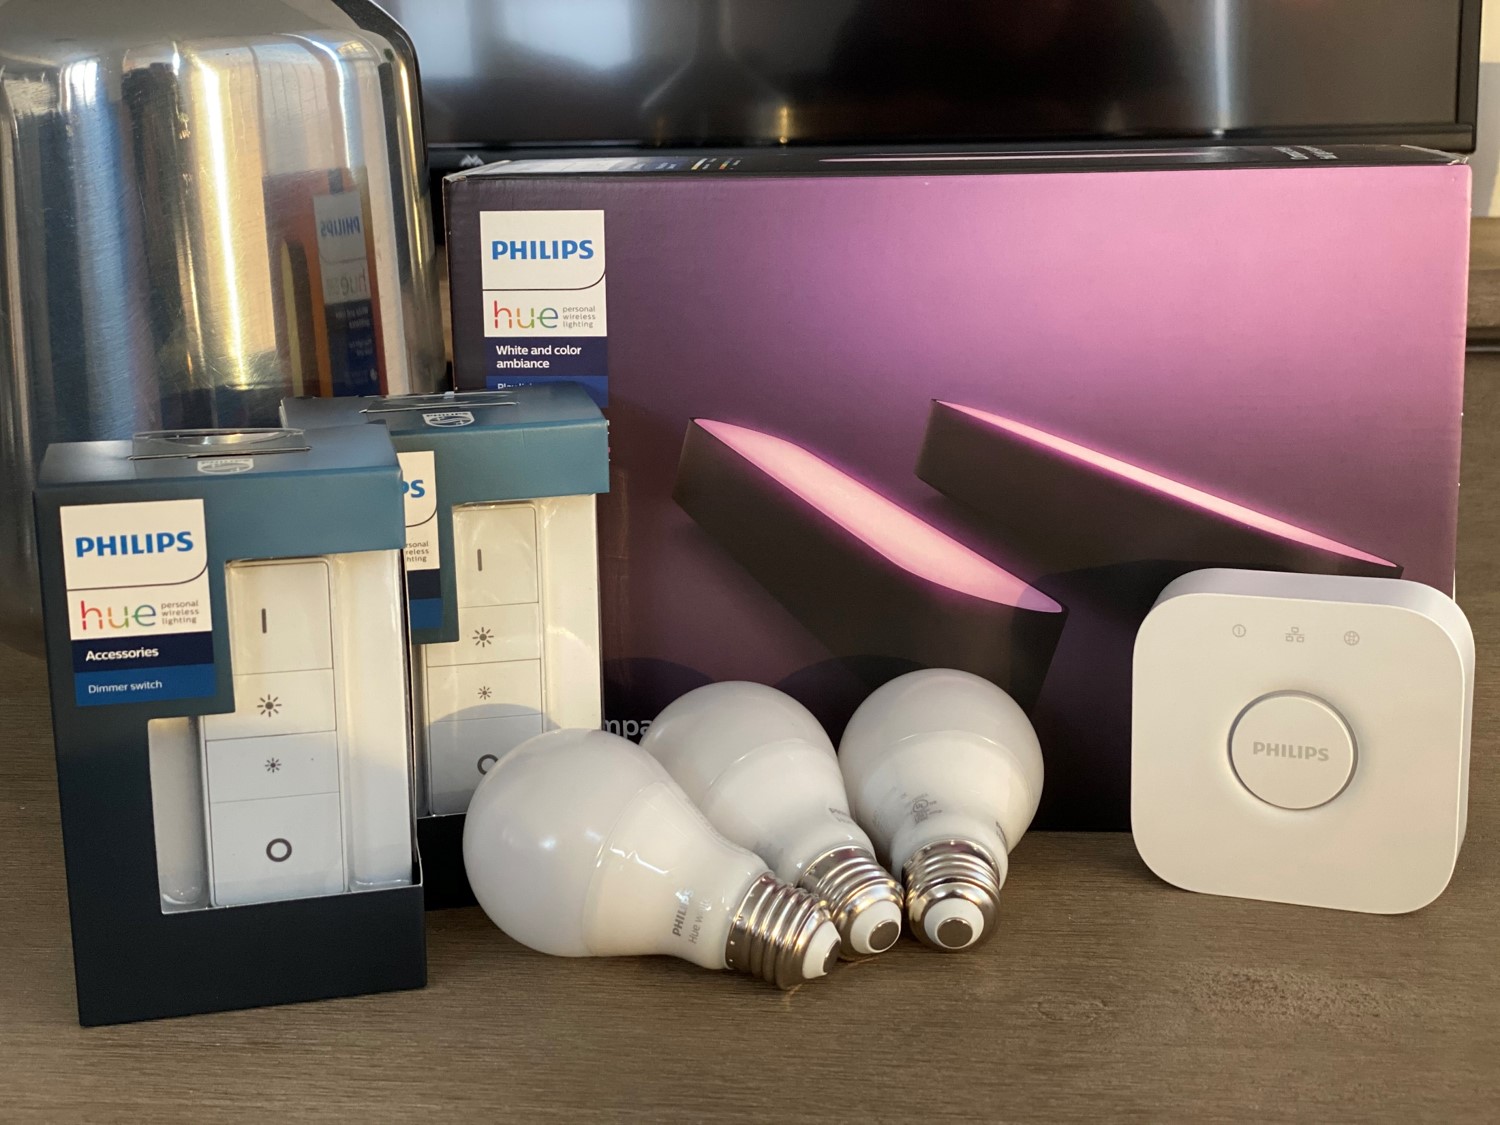 Philips Hue Smart Plug Unboxing and Setup Tutorial Beginners 